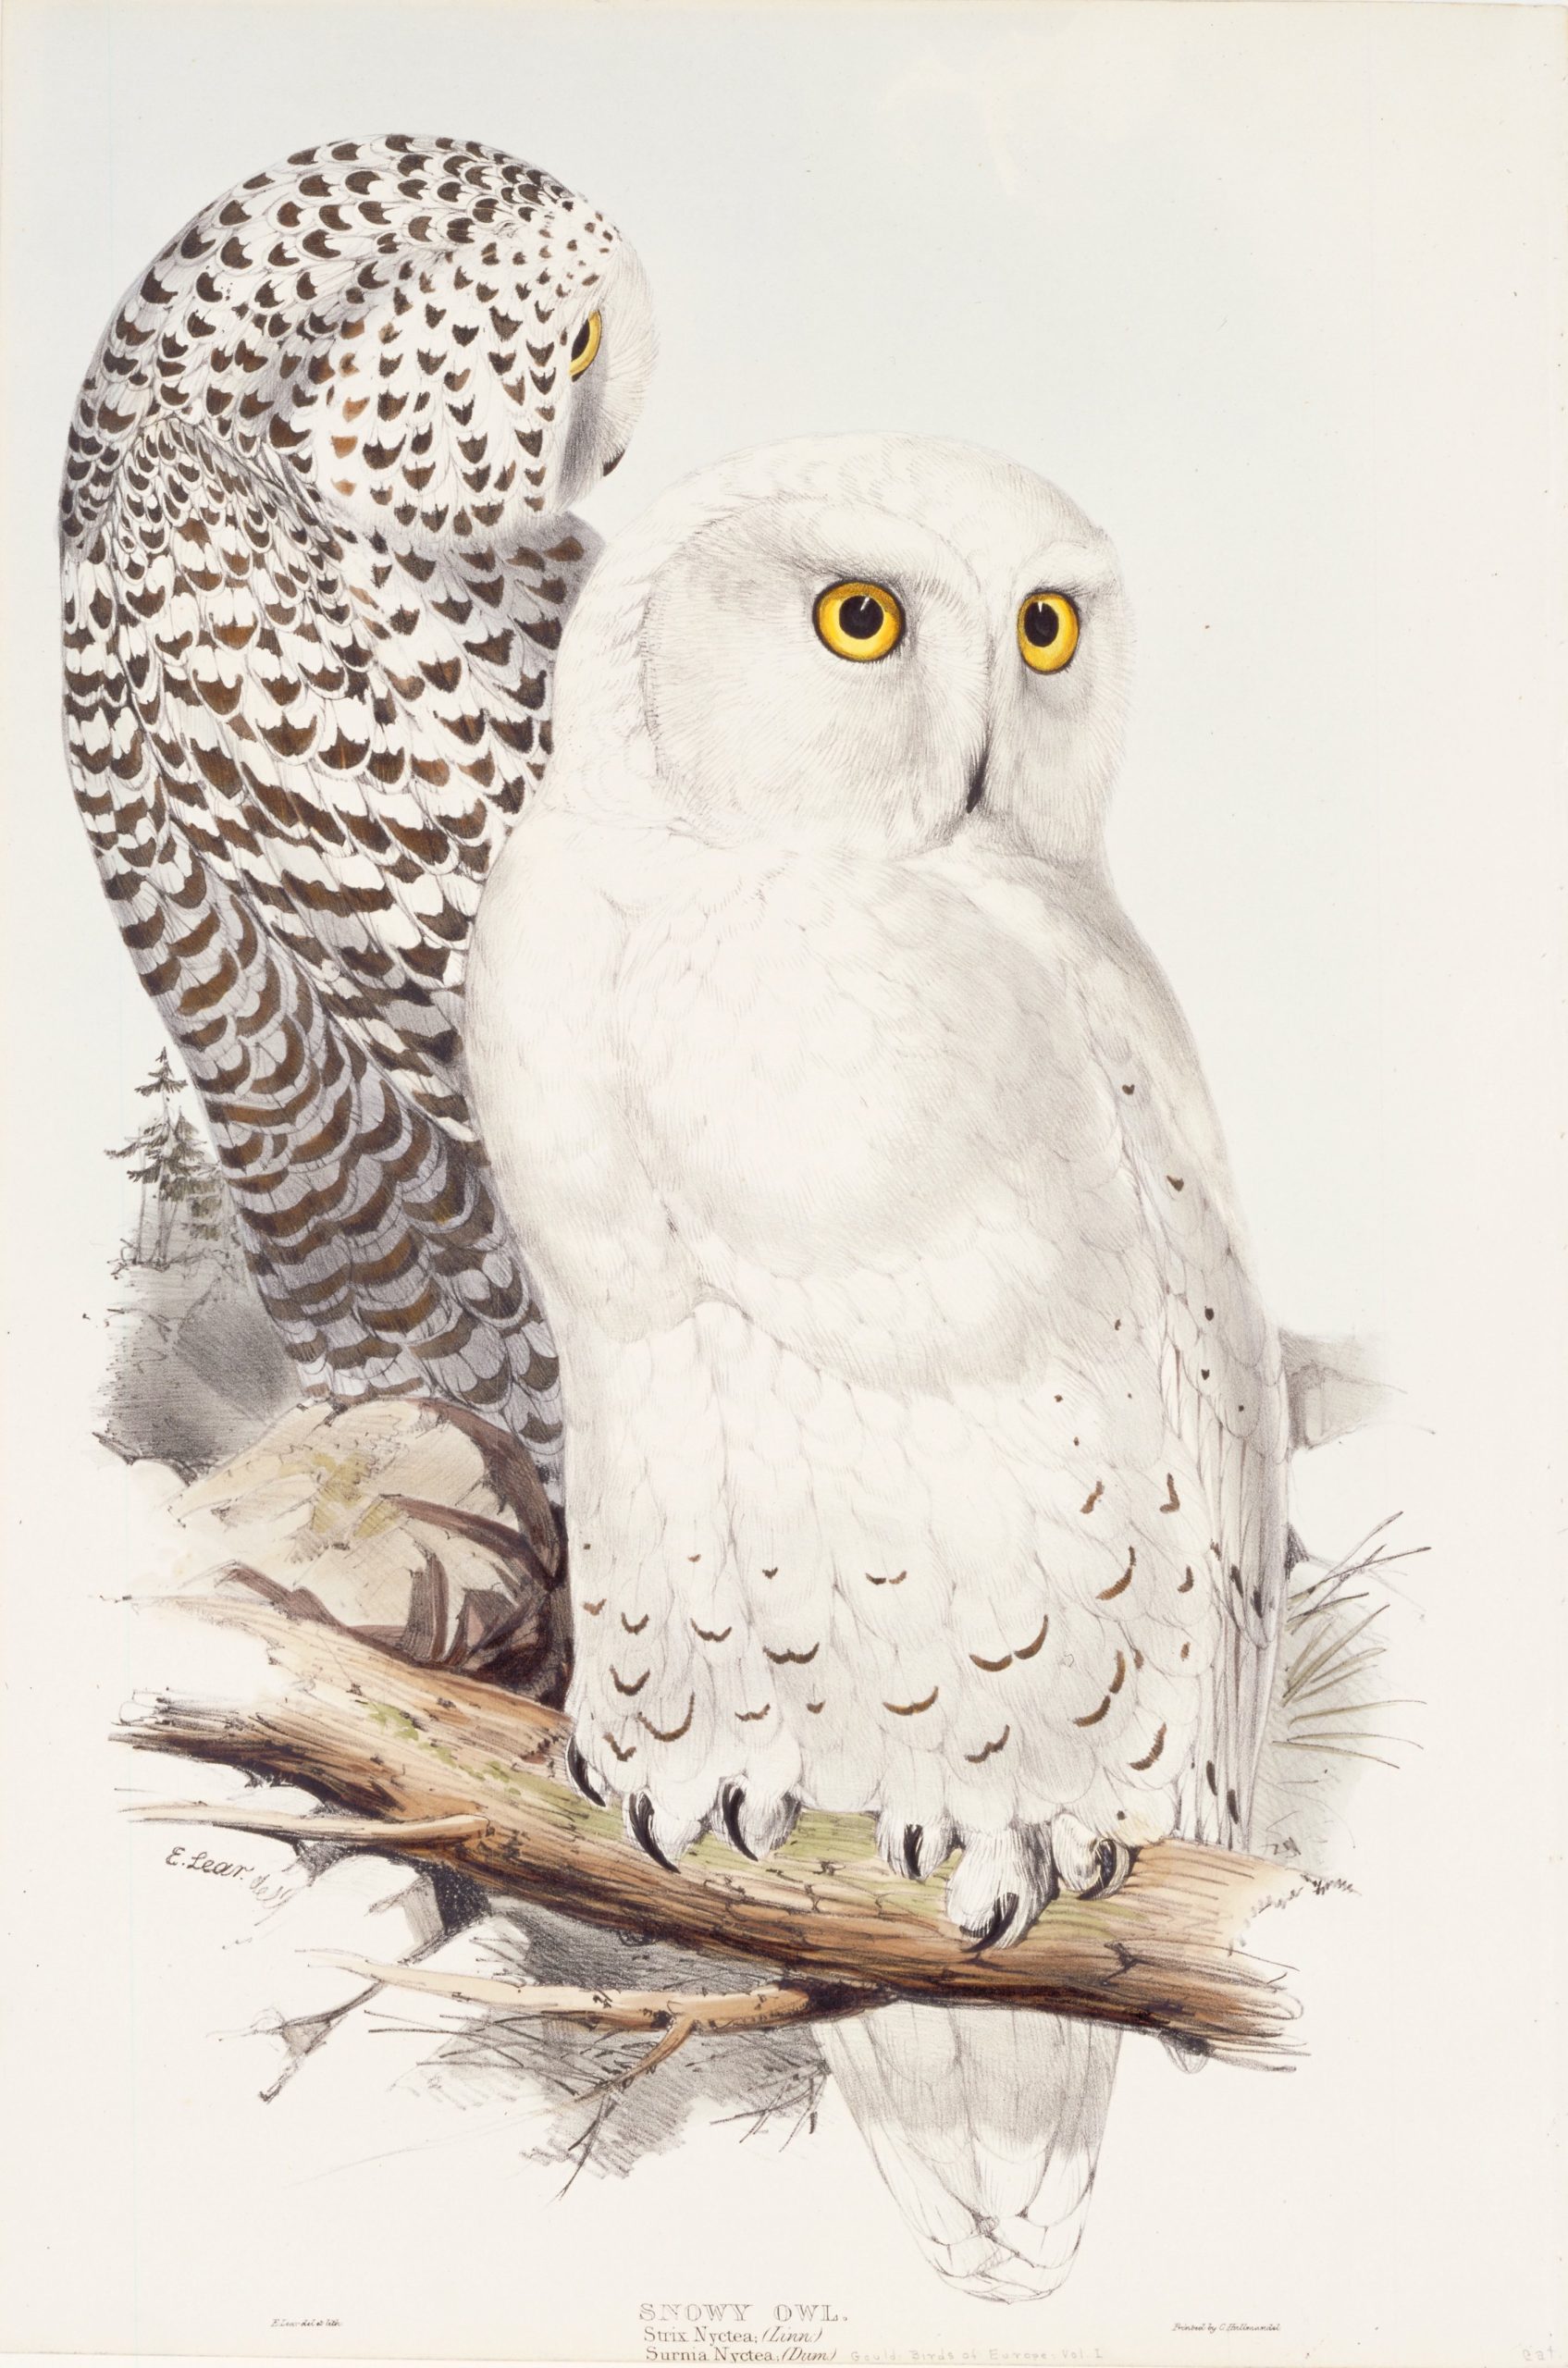 An illustration of two snowy owls